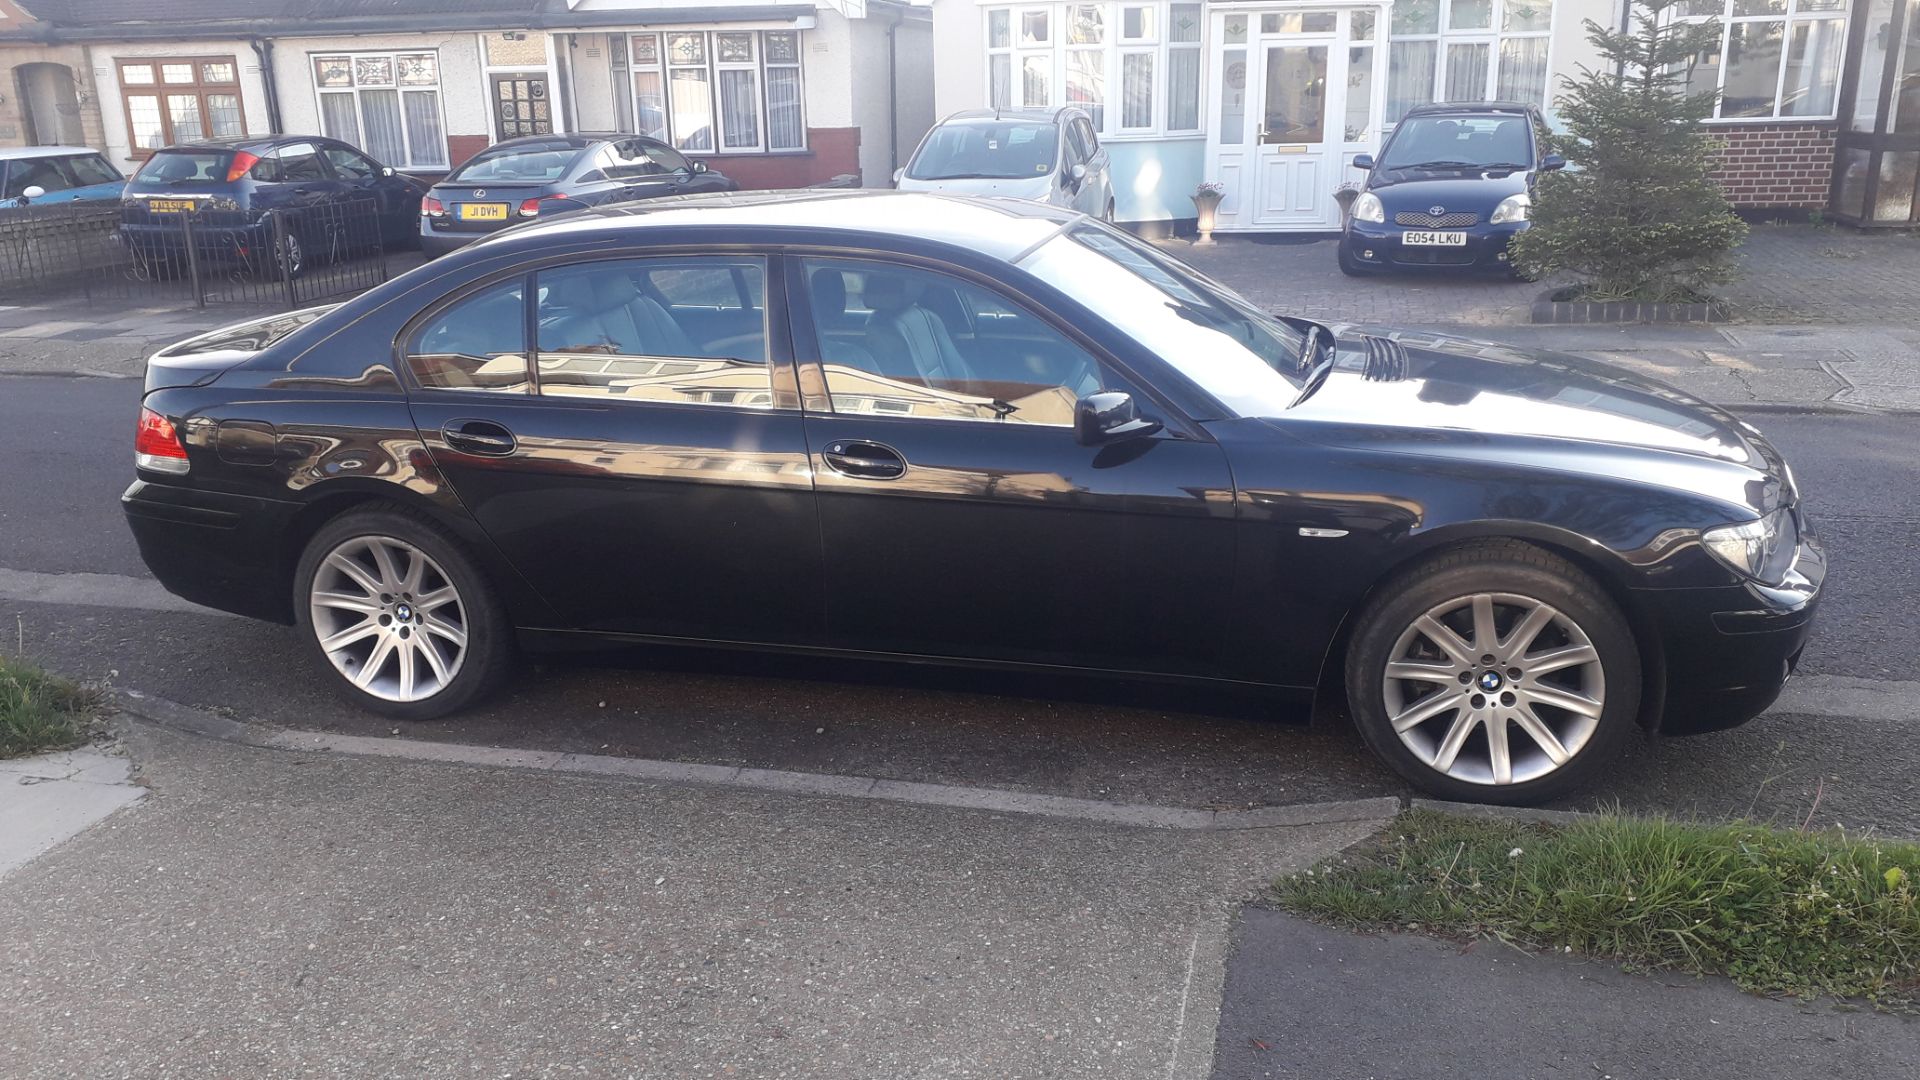 BMW 730Ld SE 4 Door Auto Saloon, colour black, registration YD08 WNT, first registered 21 March - Image 29 of 32